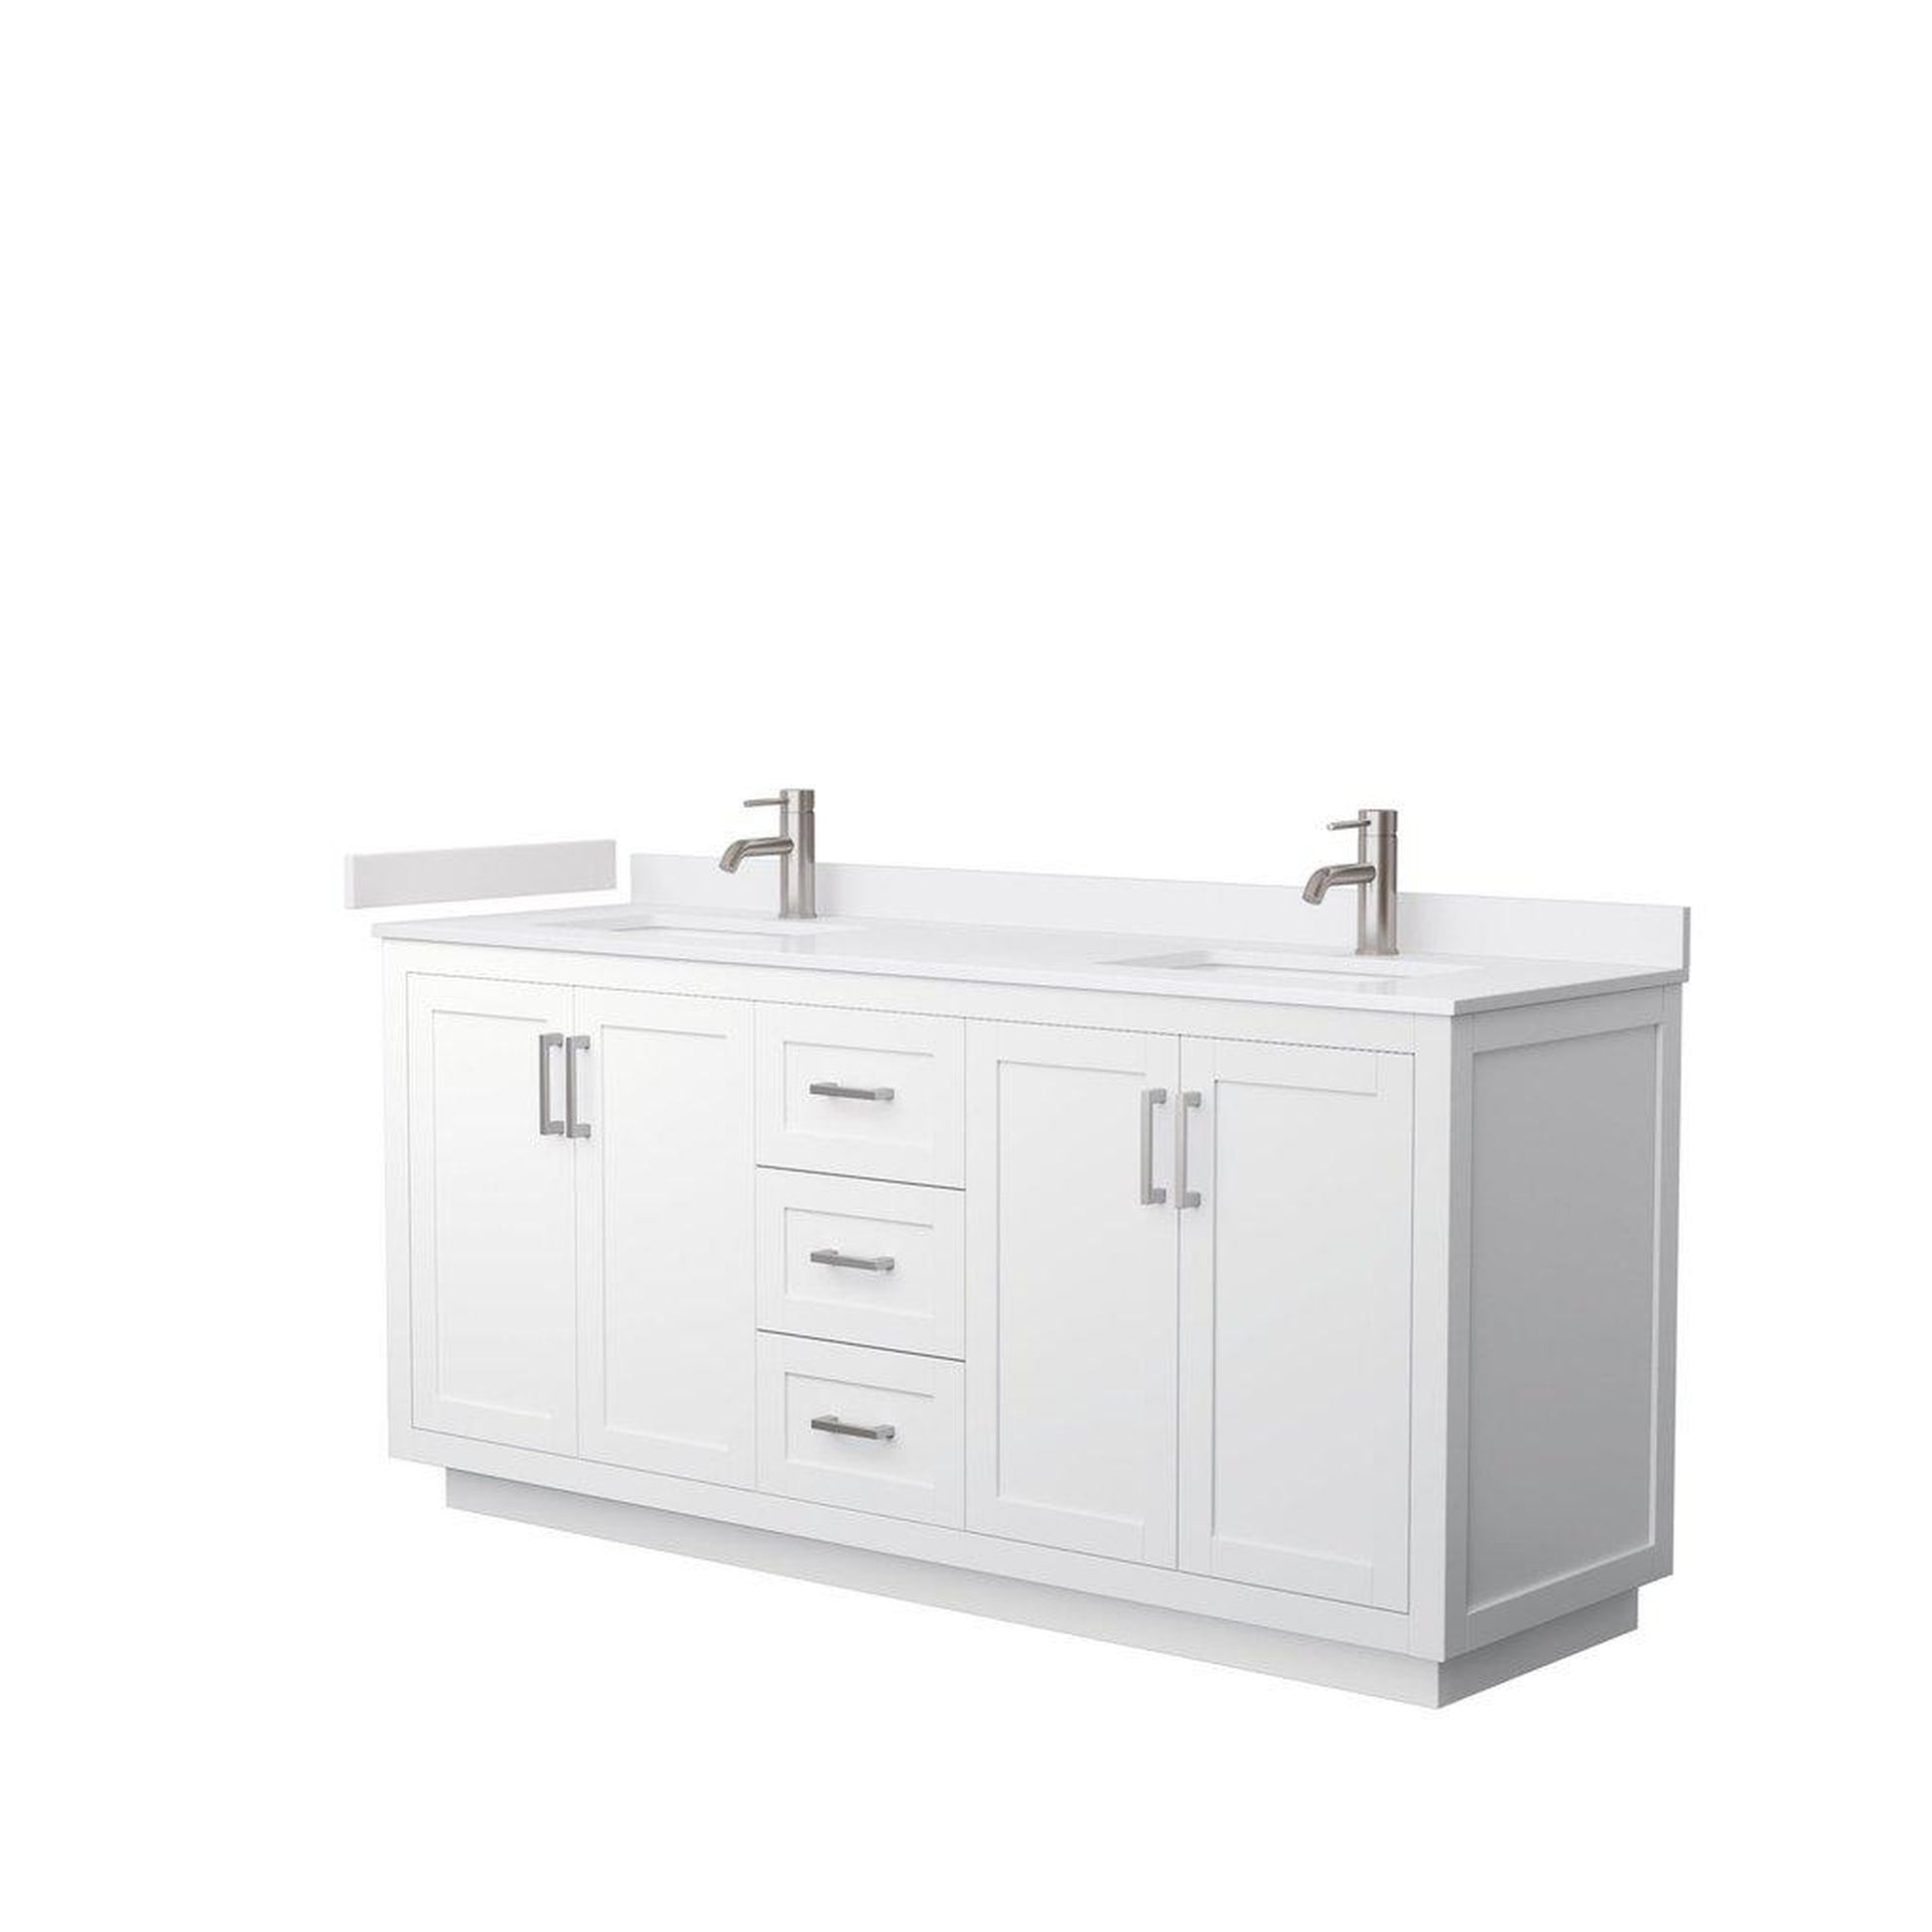 Wyndham Collection Miranda 72" Double Bathroom White Vanity Set With White Cultured Marble Countertop, Undermount Square Sink, And Brushed Nickel Trim